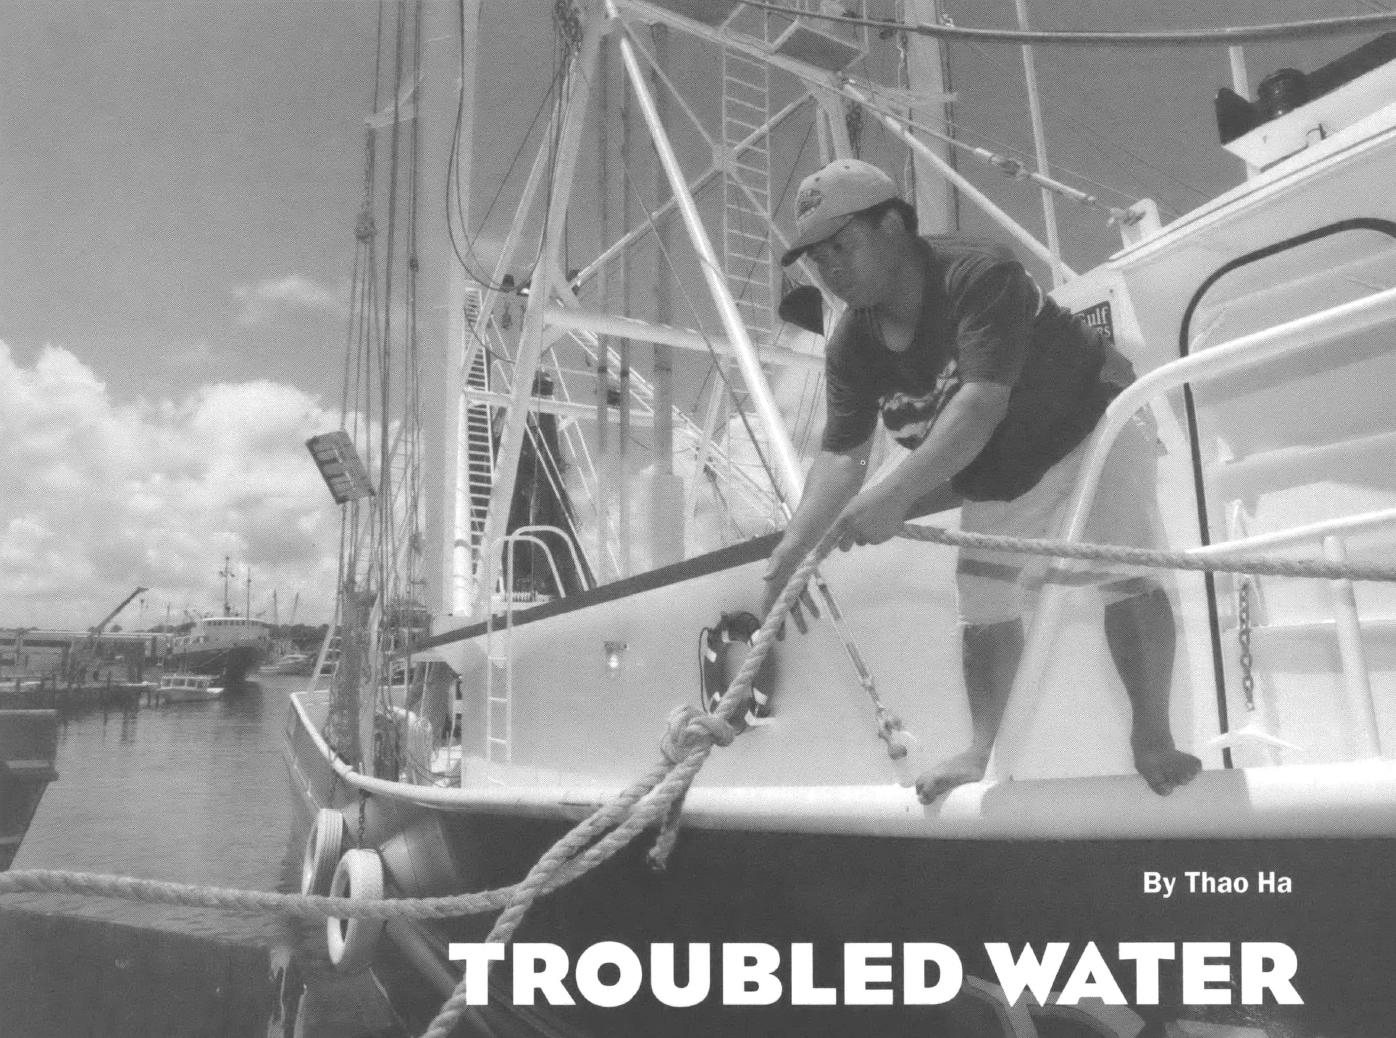 Black and white photo of a woman standing on the side of a boat pulling a rope out of the water. Text in the bottom right corner reads "Troubled Water by Thao Ha"